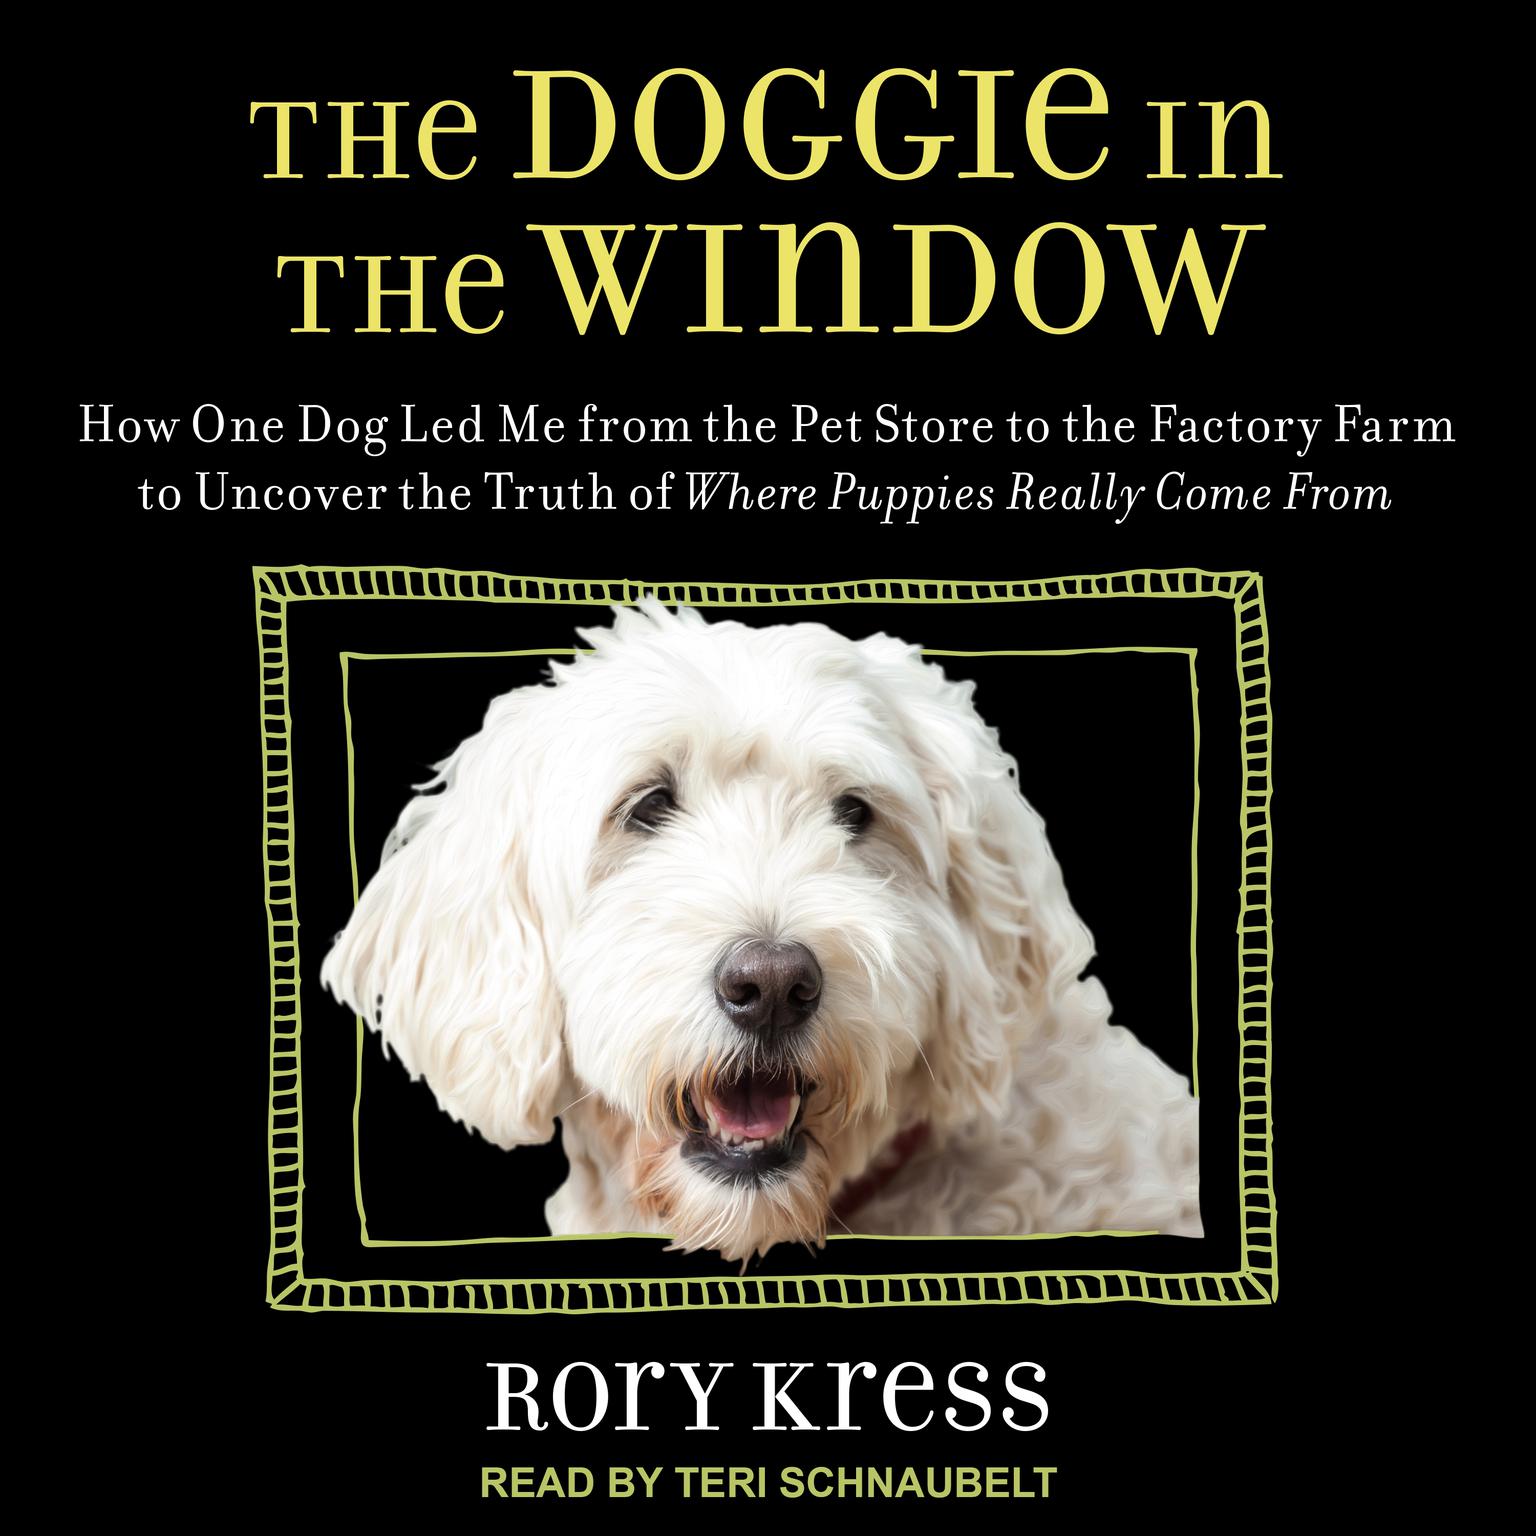 The Doggie in the Window: How One Dog Led Me from the Pet Store to the Factory Farm to Uncover the Truth of Where Puppies Really Come From Audiobook, by Rory Kress